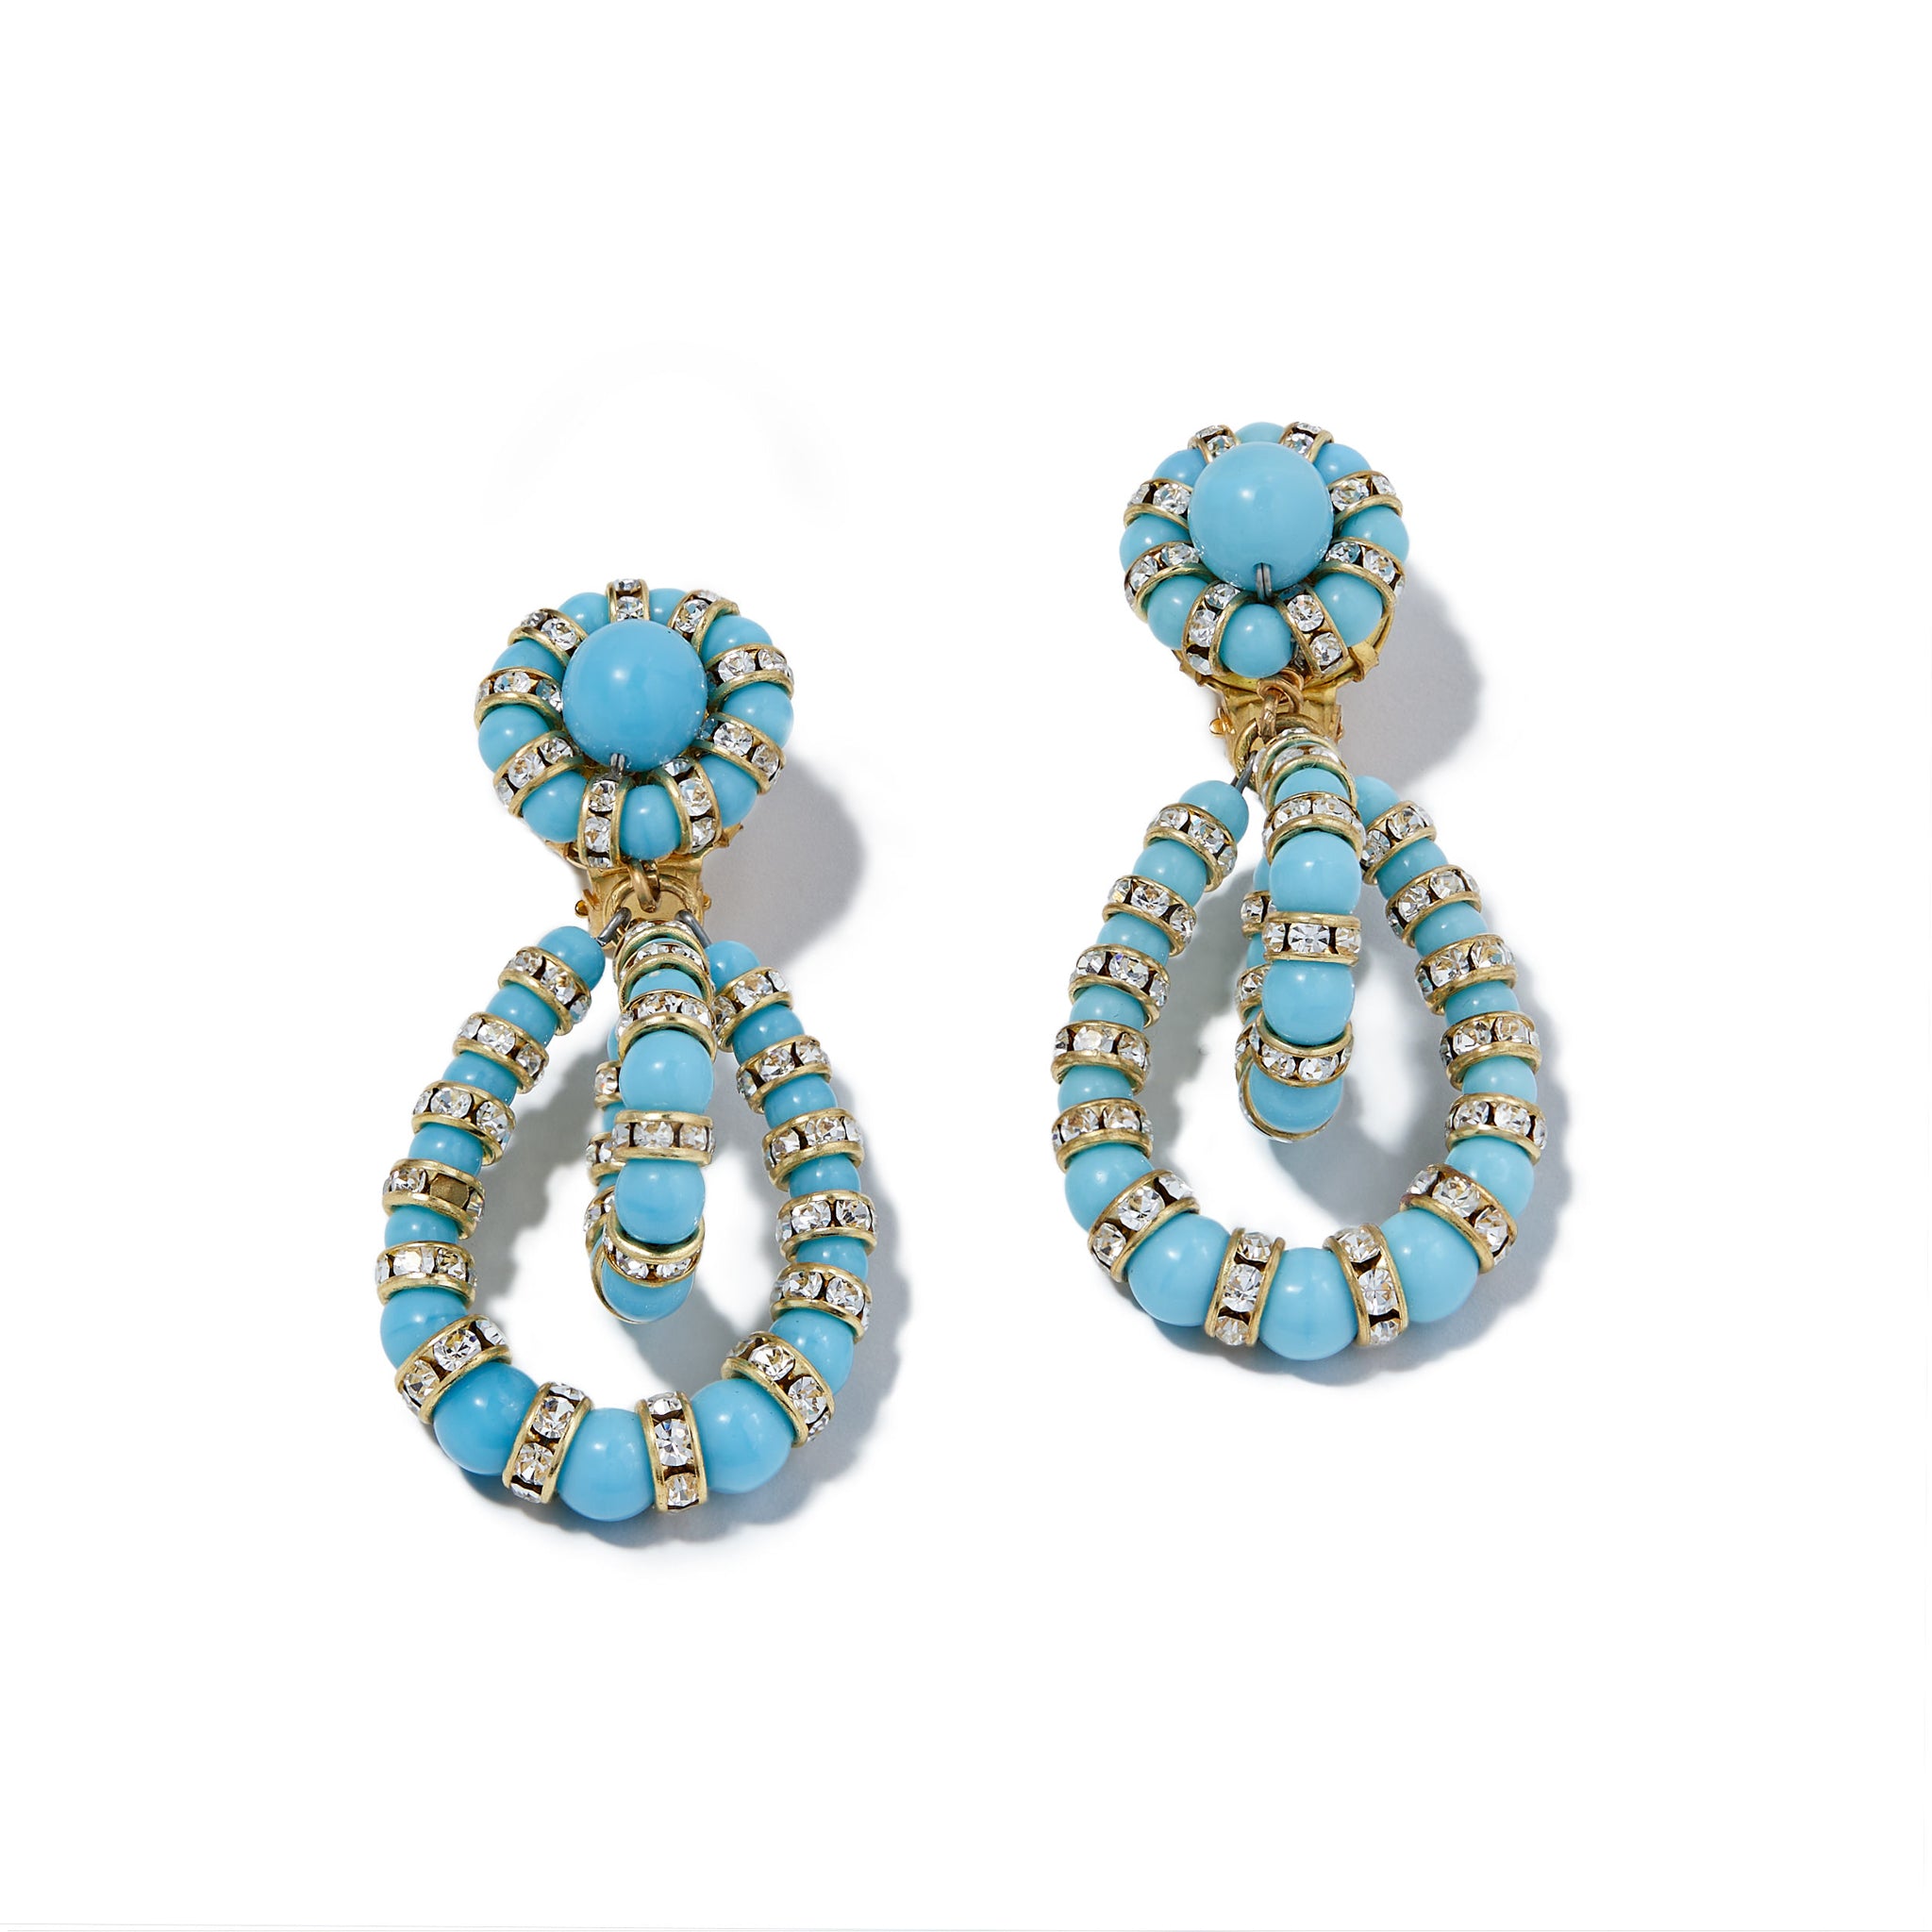 Kendra Scott | Parsons Silver Statement Earrings in Variegated Turquoi